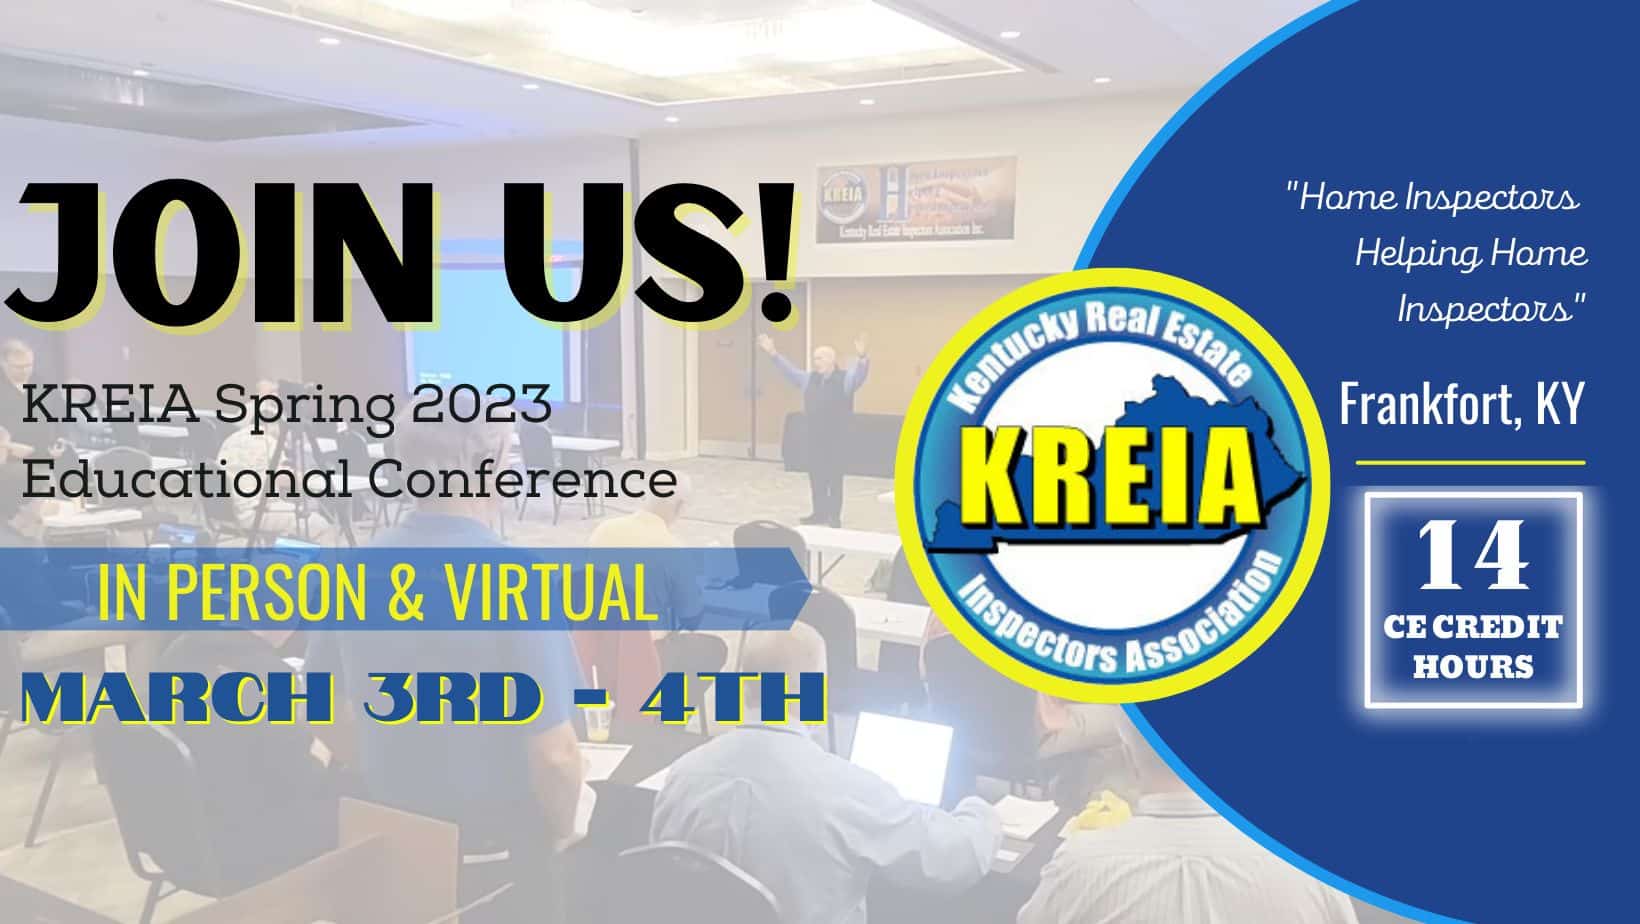 KREIA promotional graphic featuring their logo and the following text: "Join us! KREIA Spring 2023 Educational Conference. In Person & Virtual. March 3rd-4th. Home Inspectors Helping Home Inspectors. Frankfort, KY. 14 CE Credit Hours."